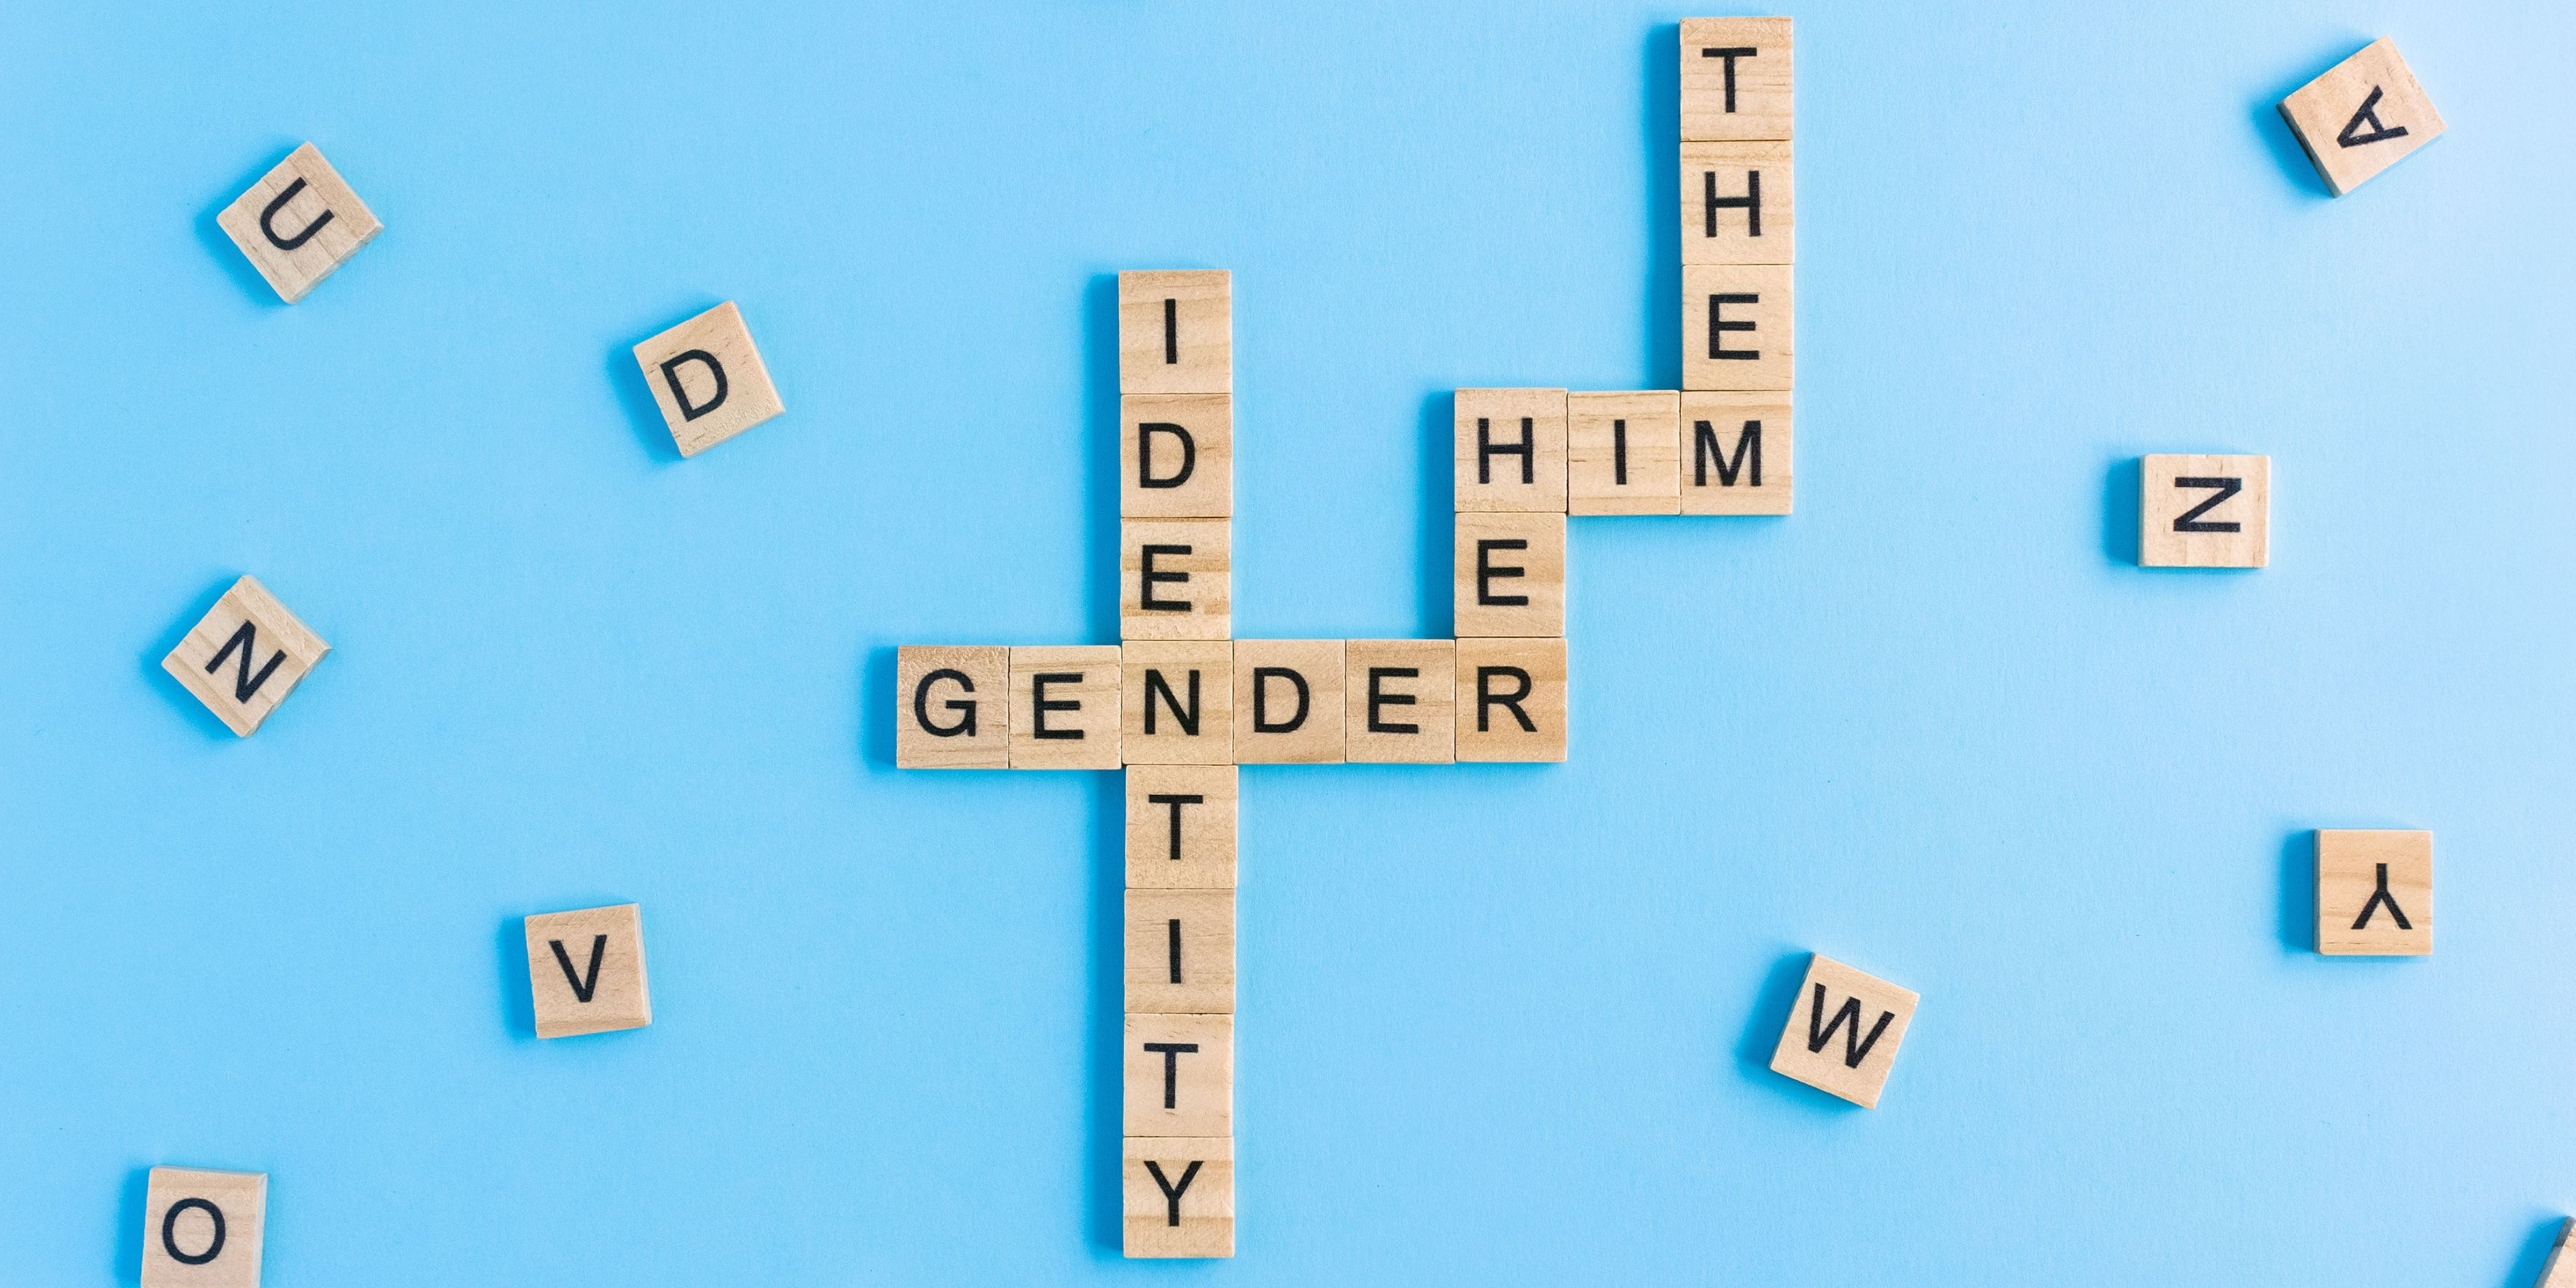 Scrabble Pieces - Words: Gender Identity, She, Him, They